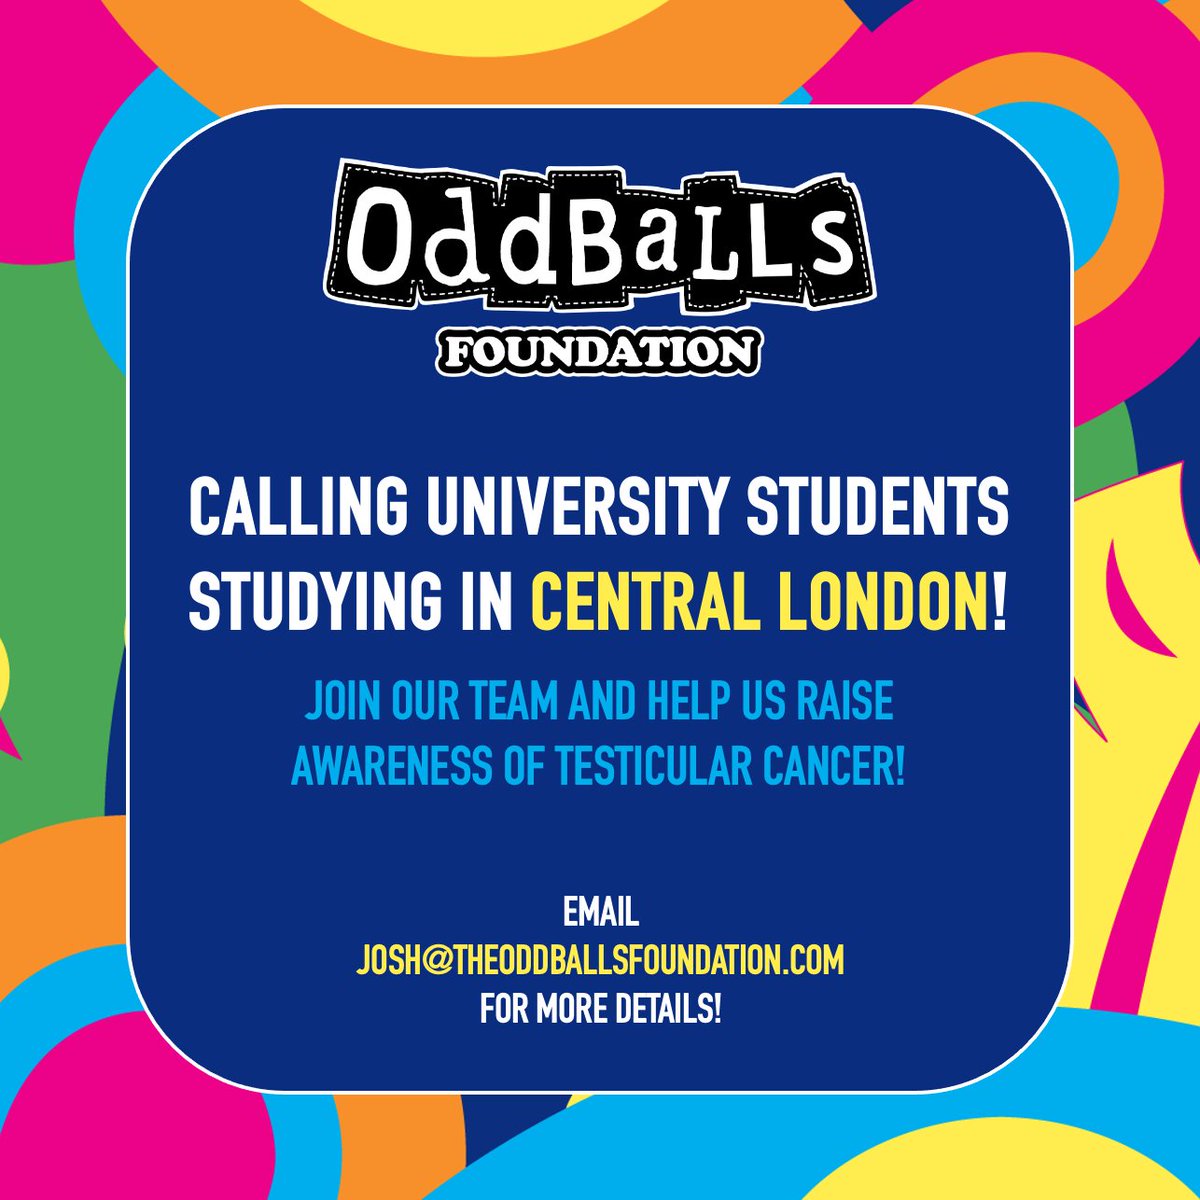 Central London University Ambassadors WANTED! 💪 If you’re a university student studying in central London, who may be interested in representing The OddBalls Foundation, please contact Josh via the email below. 🙌 📧 Josh@TheOddBallsFoundation.com #London